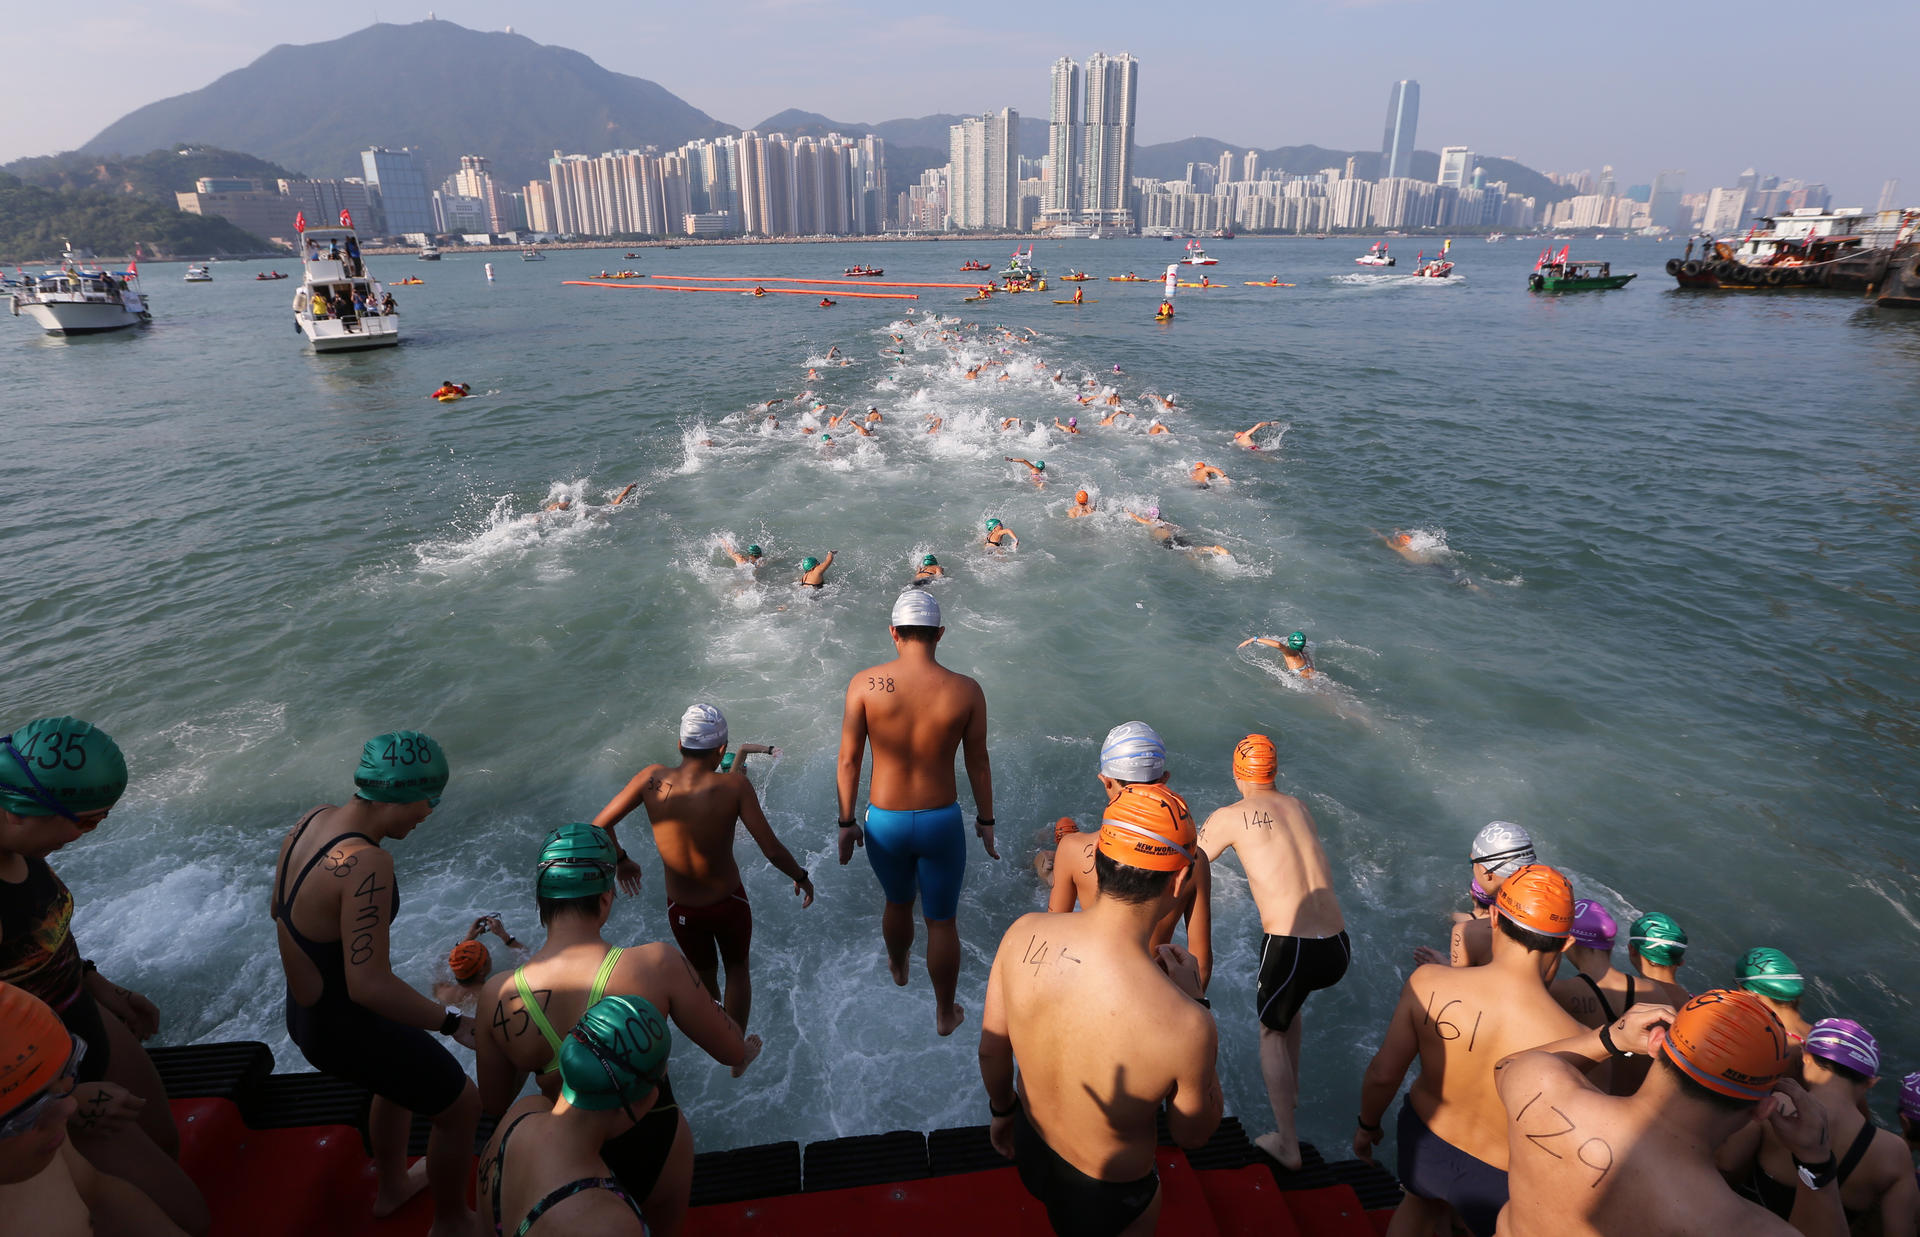 Swimmers compete again in the cross-harbour race, which was suspended for 33 years due to pollution. Photo: Sam Tsang